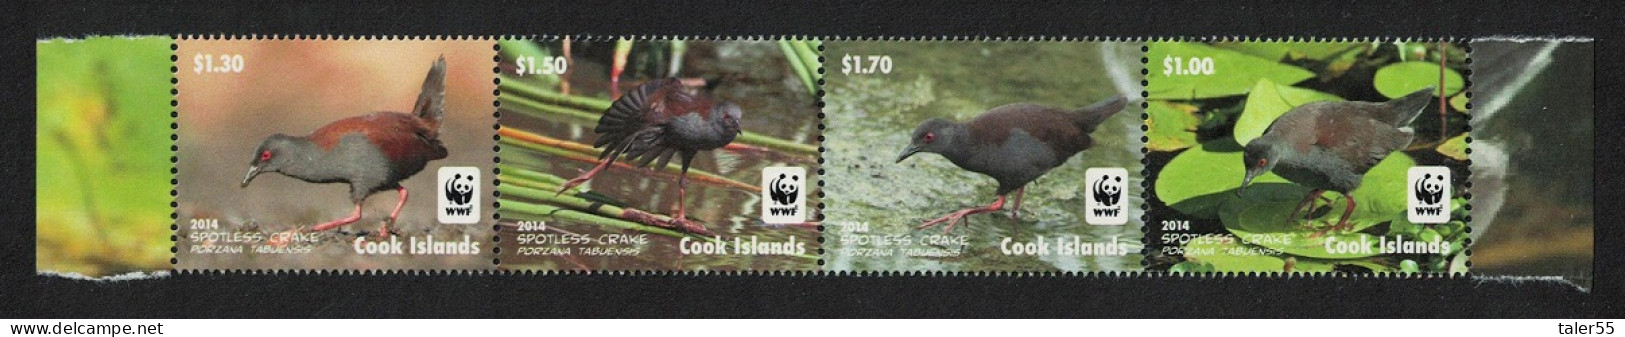 Cook Is. WWF Spotless Crake Bird Strip Of 4v Without Frame 2014 MNH SG#1808a-1811a - Islas Cook